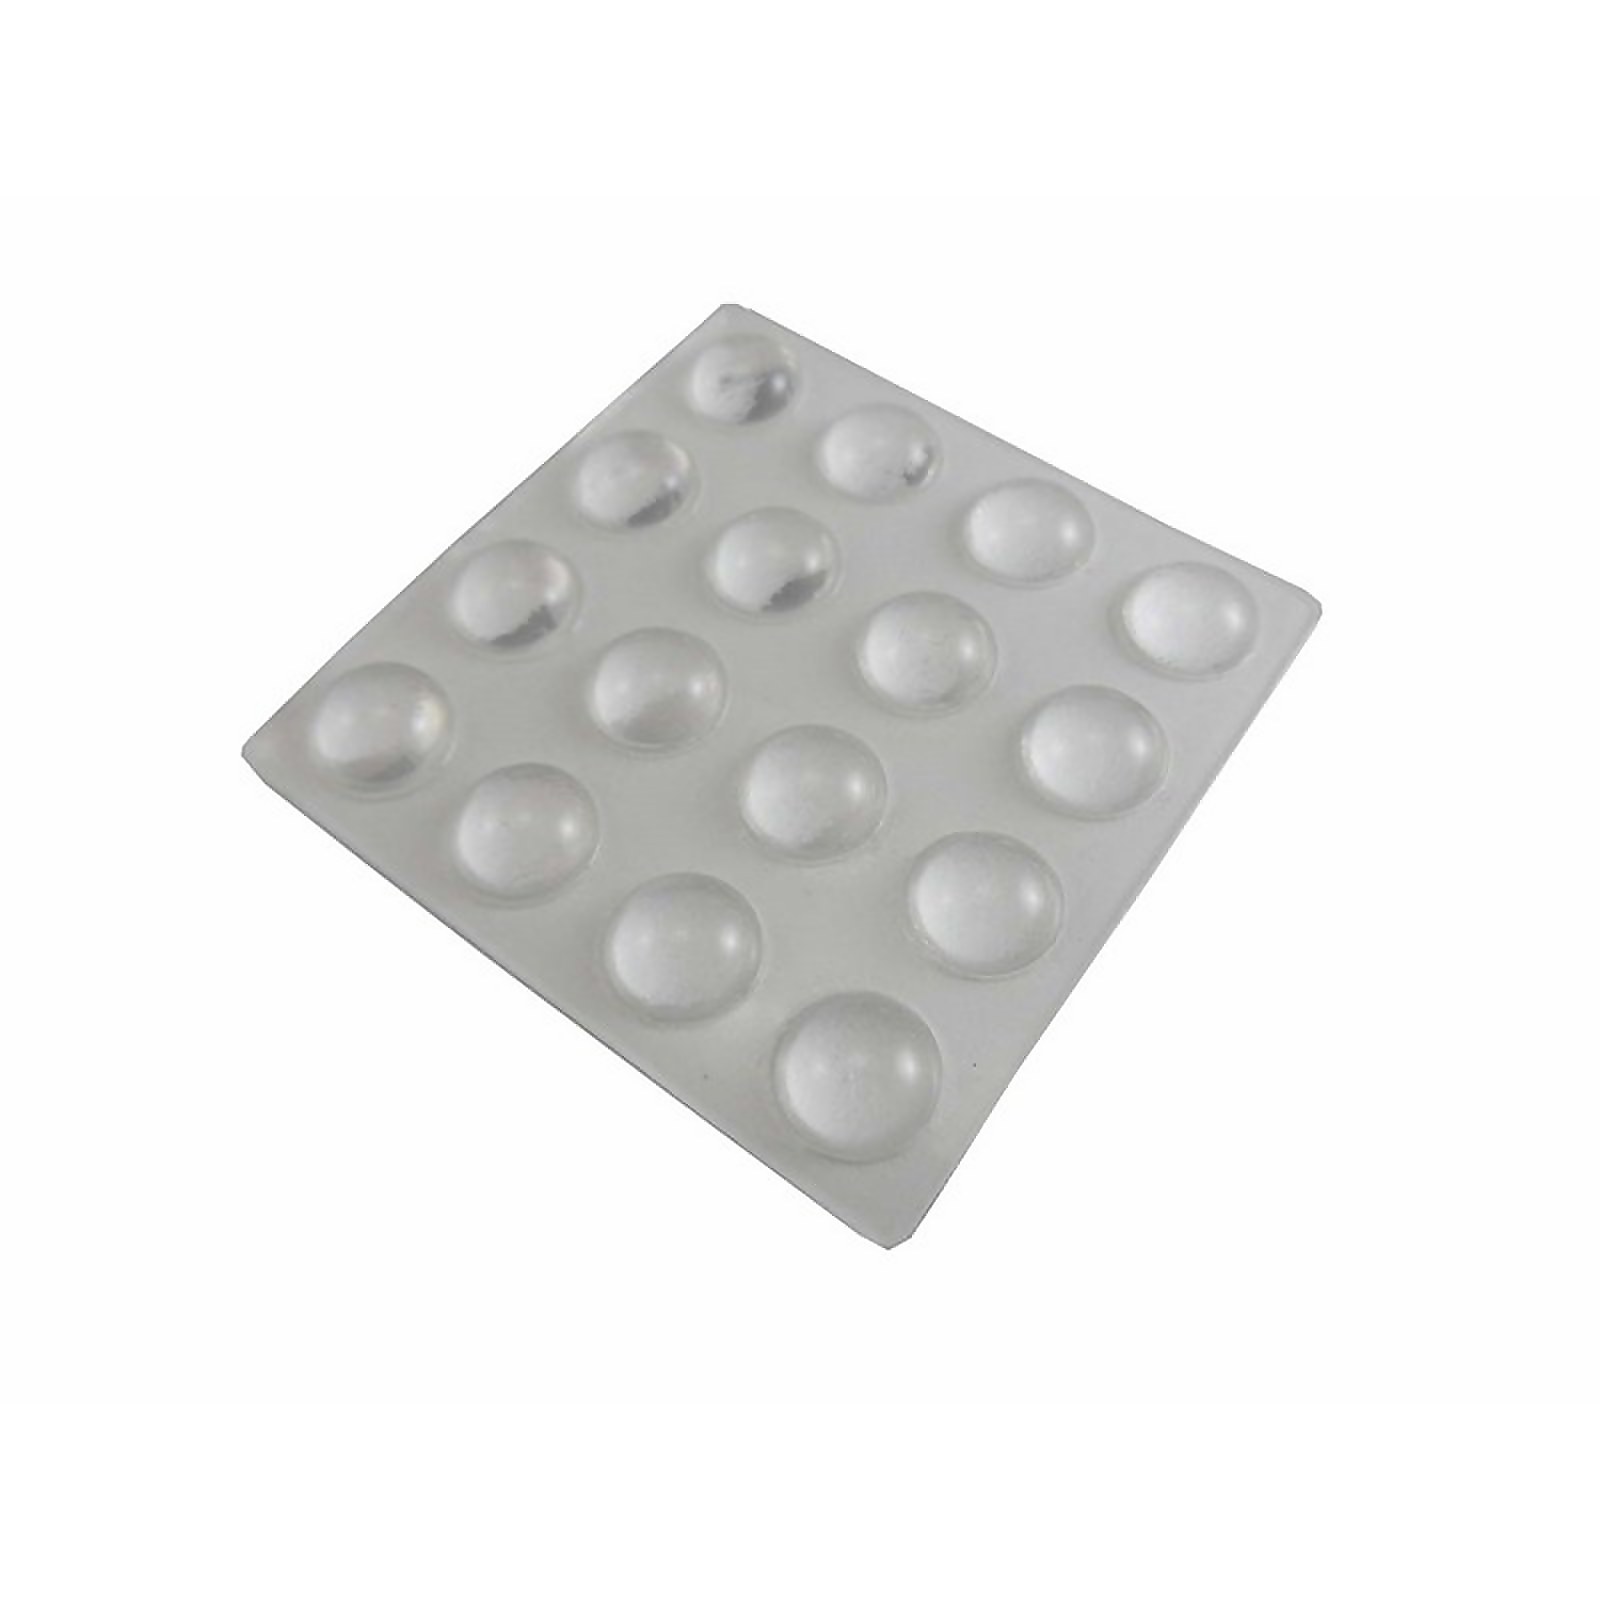 Photo of Protective Pad Clear 10mm - 16 Pack